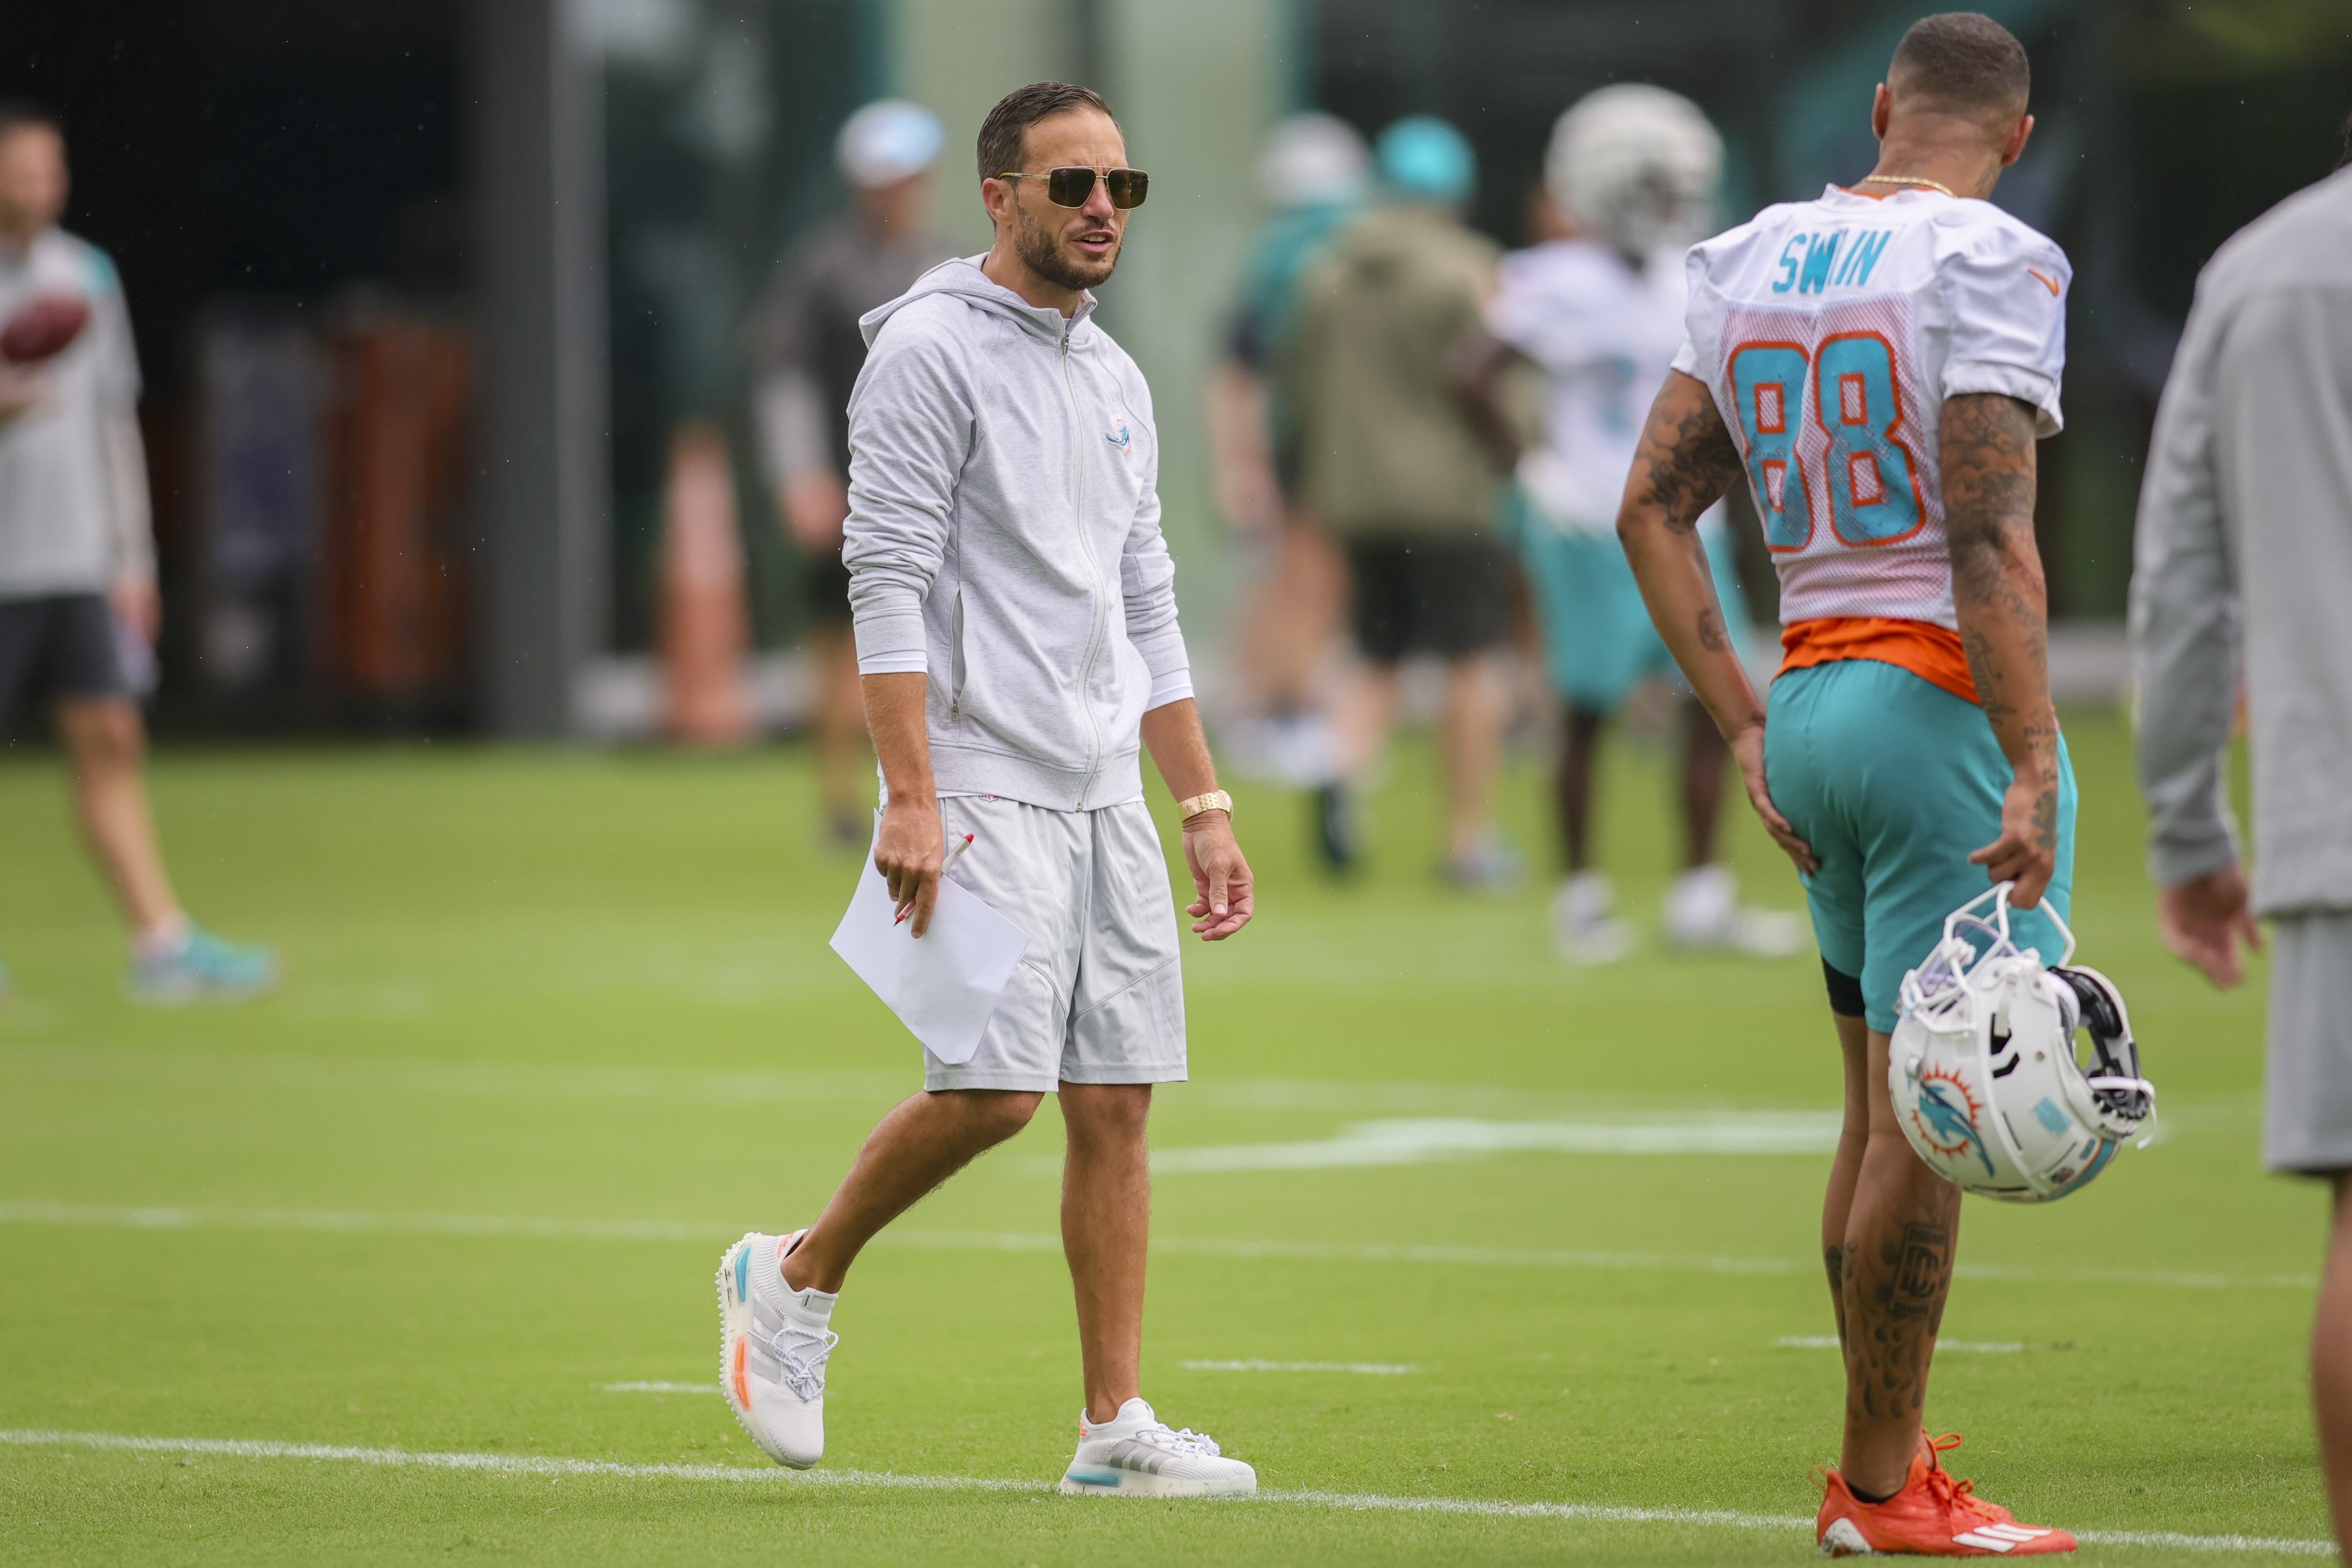 NFL: Miami Dolphins Training Camp